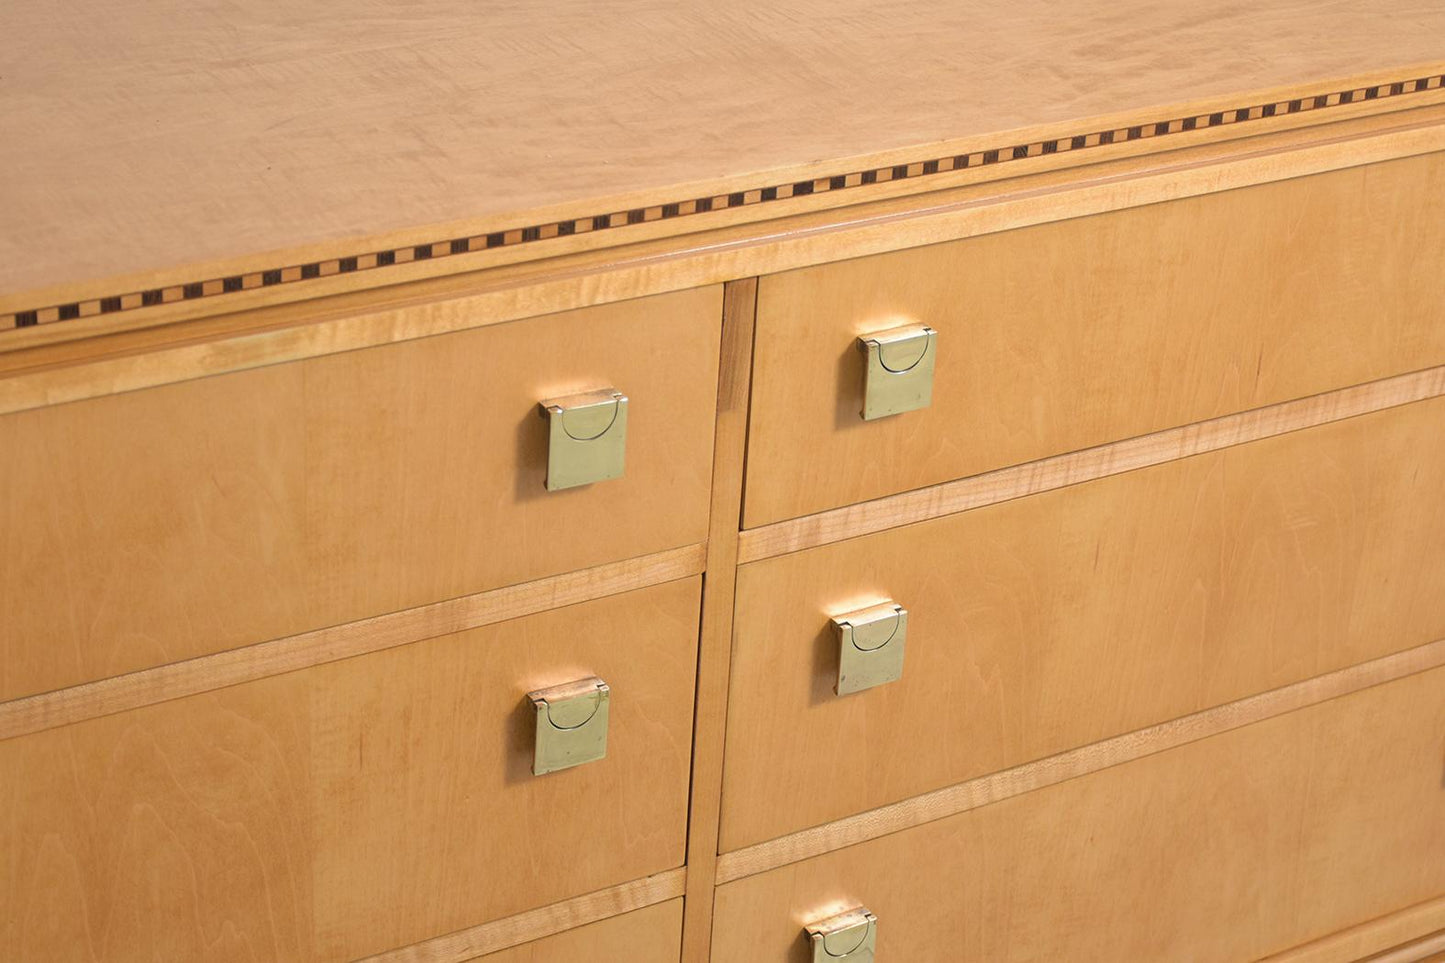 1960s Birch Mid-Century Chest of Drawers: Vintage Elegance Meets Modern Style